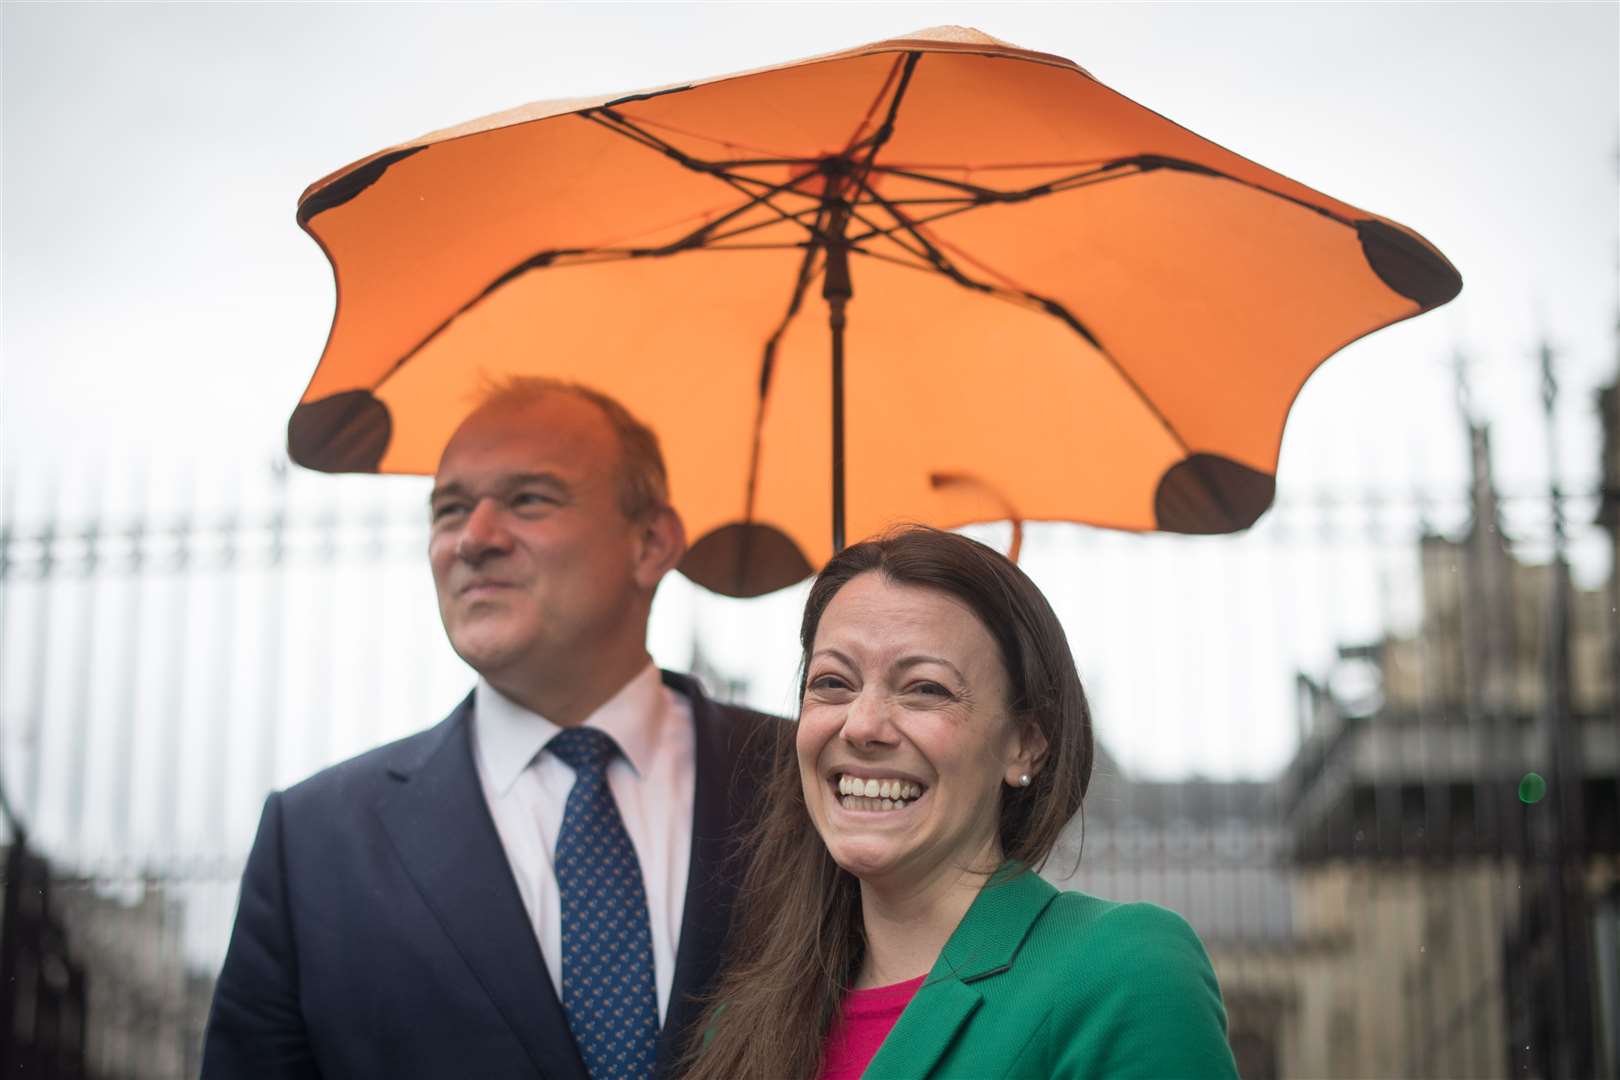 Newly elected Liberal Democrat MP for Chesham and Amersham Sarah Green is welcomed to the House of Commons by party leader Sir Ed Davey (Stefan Rousseau/PA)